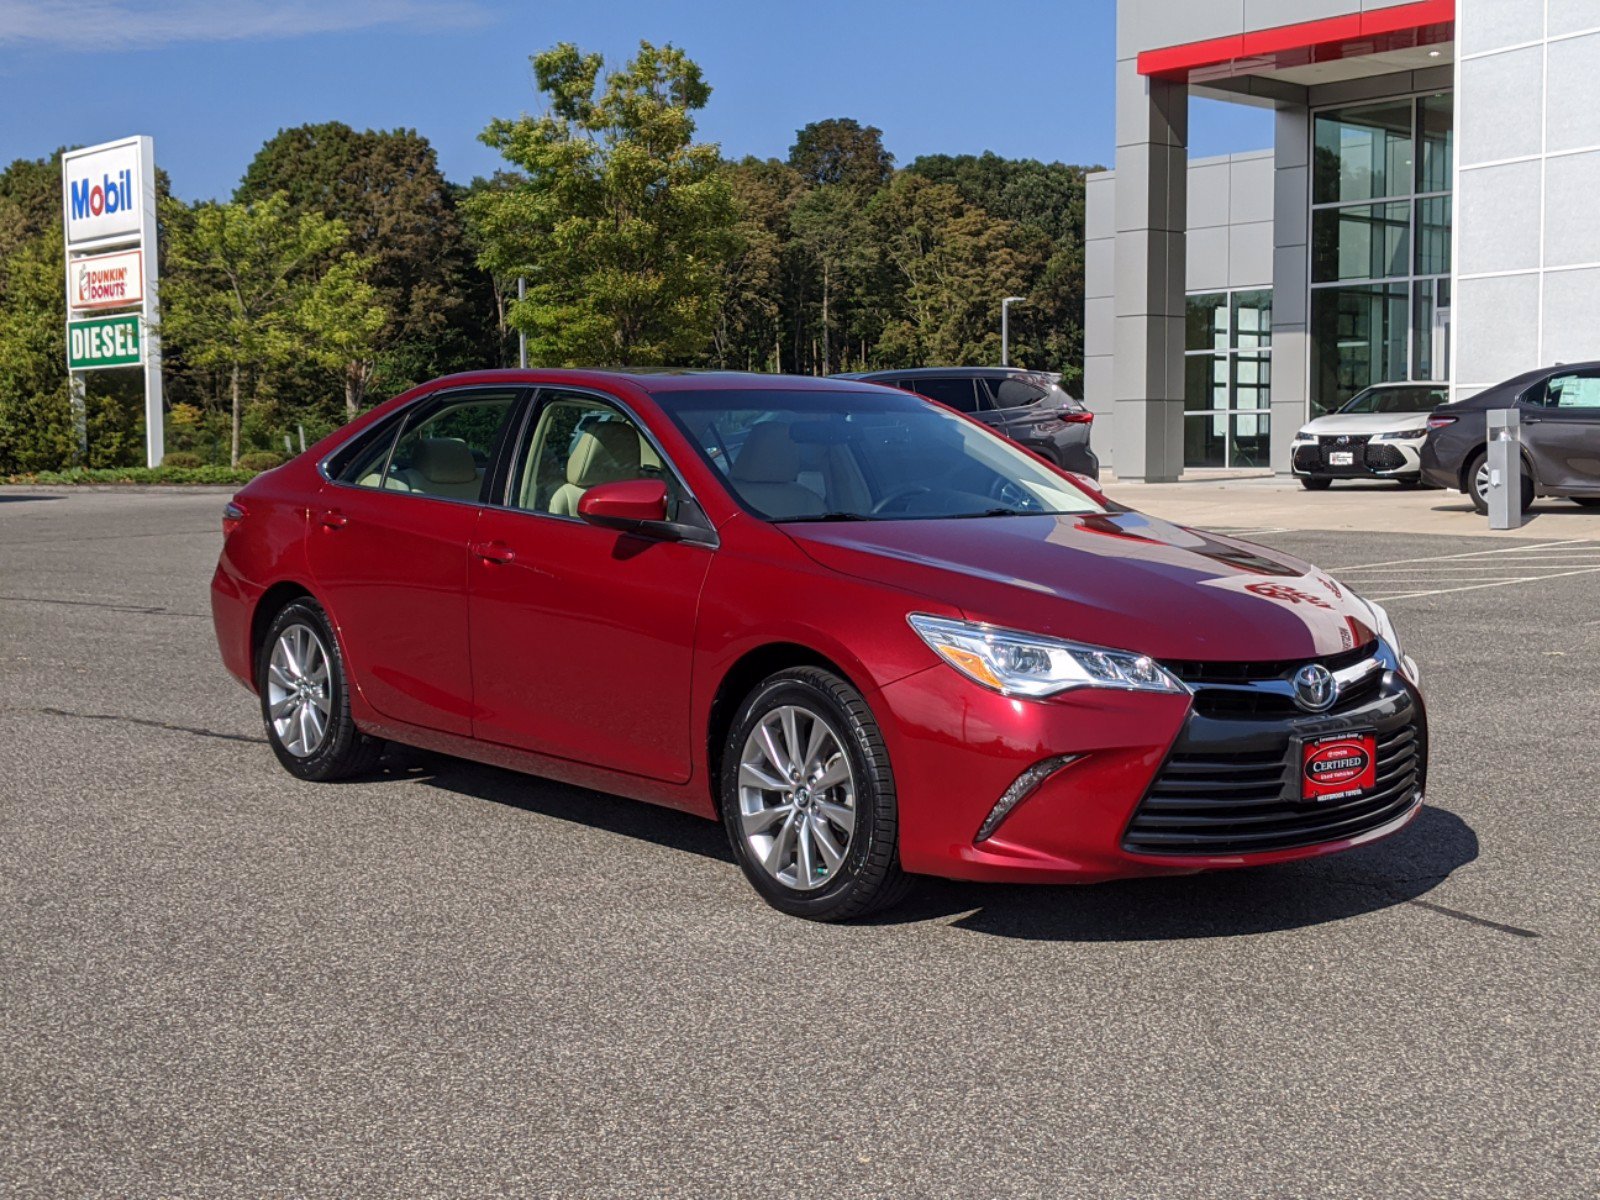 PreOwned 2017 Toyota Camry XLE V6 FWD 4dr Car